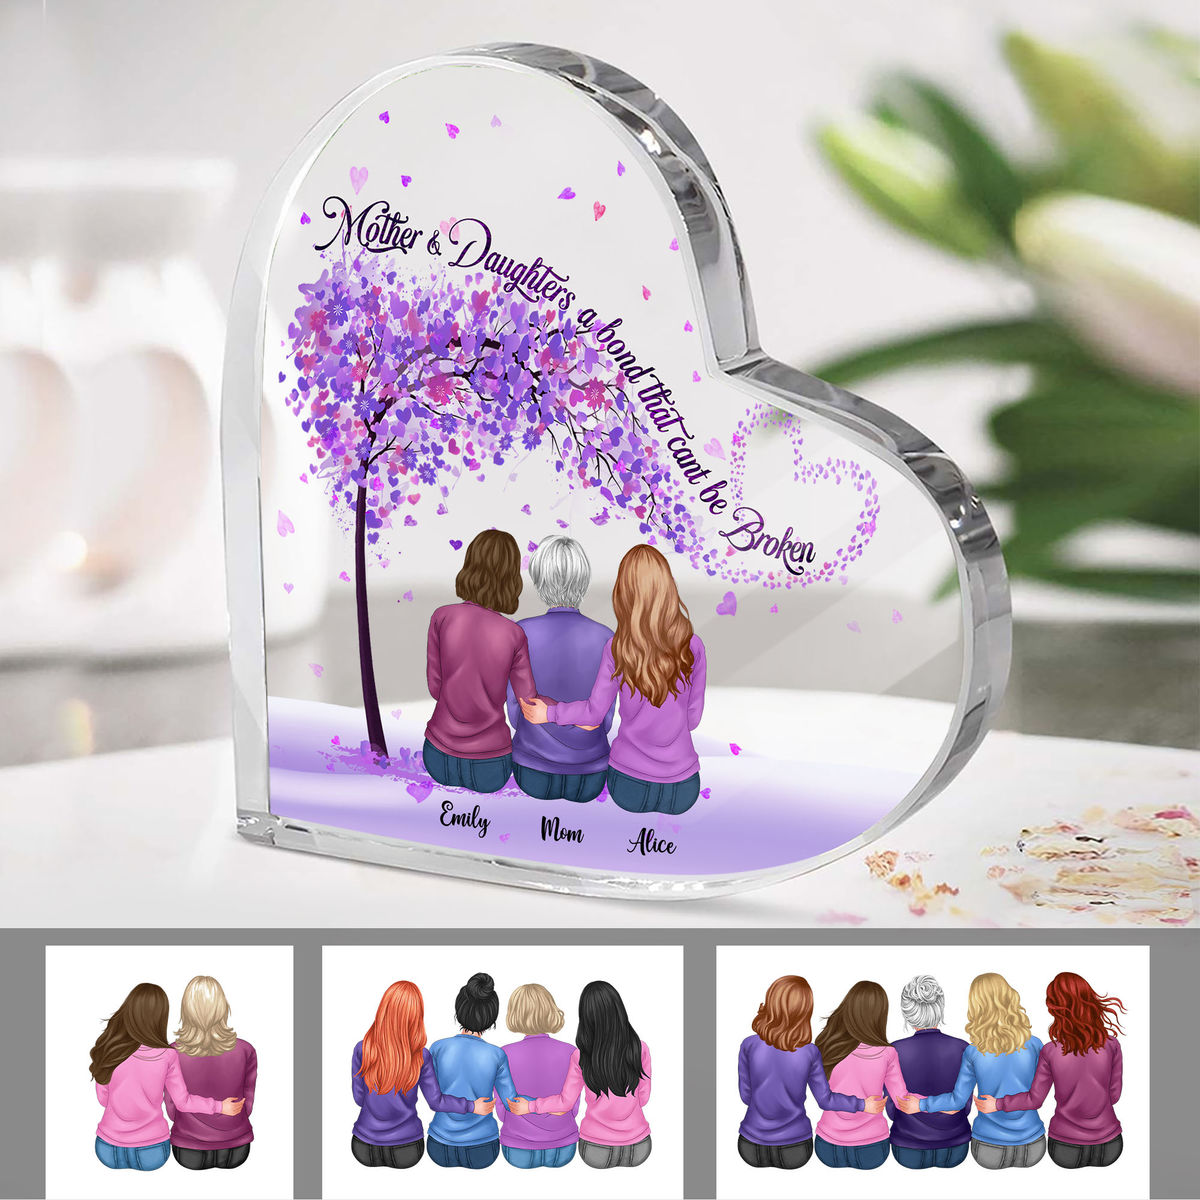 Personalized Desktop - Gifts For Mom - Mother and Daughters a bond that can't be broken (23180) Mother's Day, Birthday, Xmas Gifts